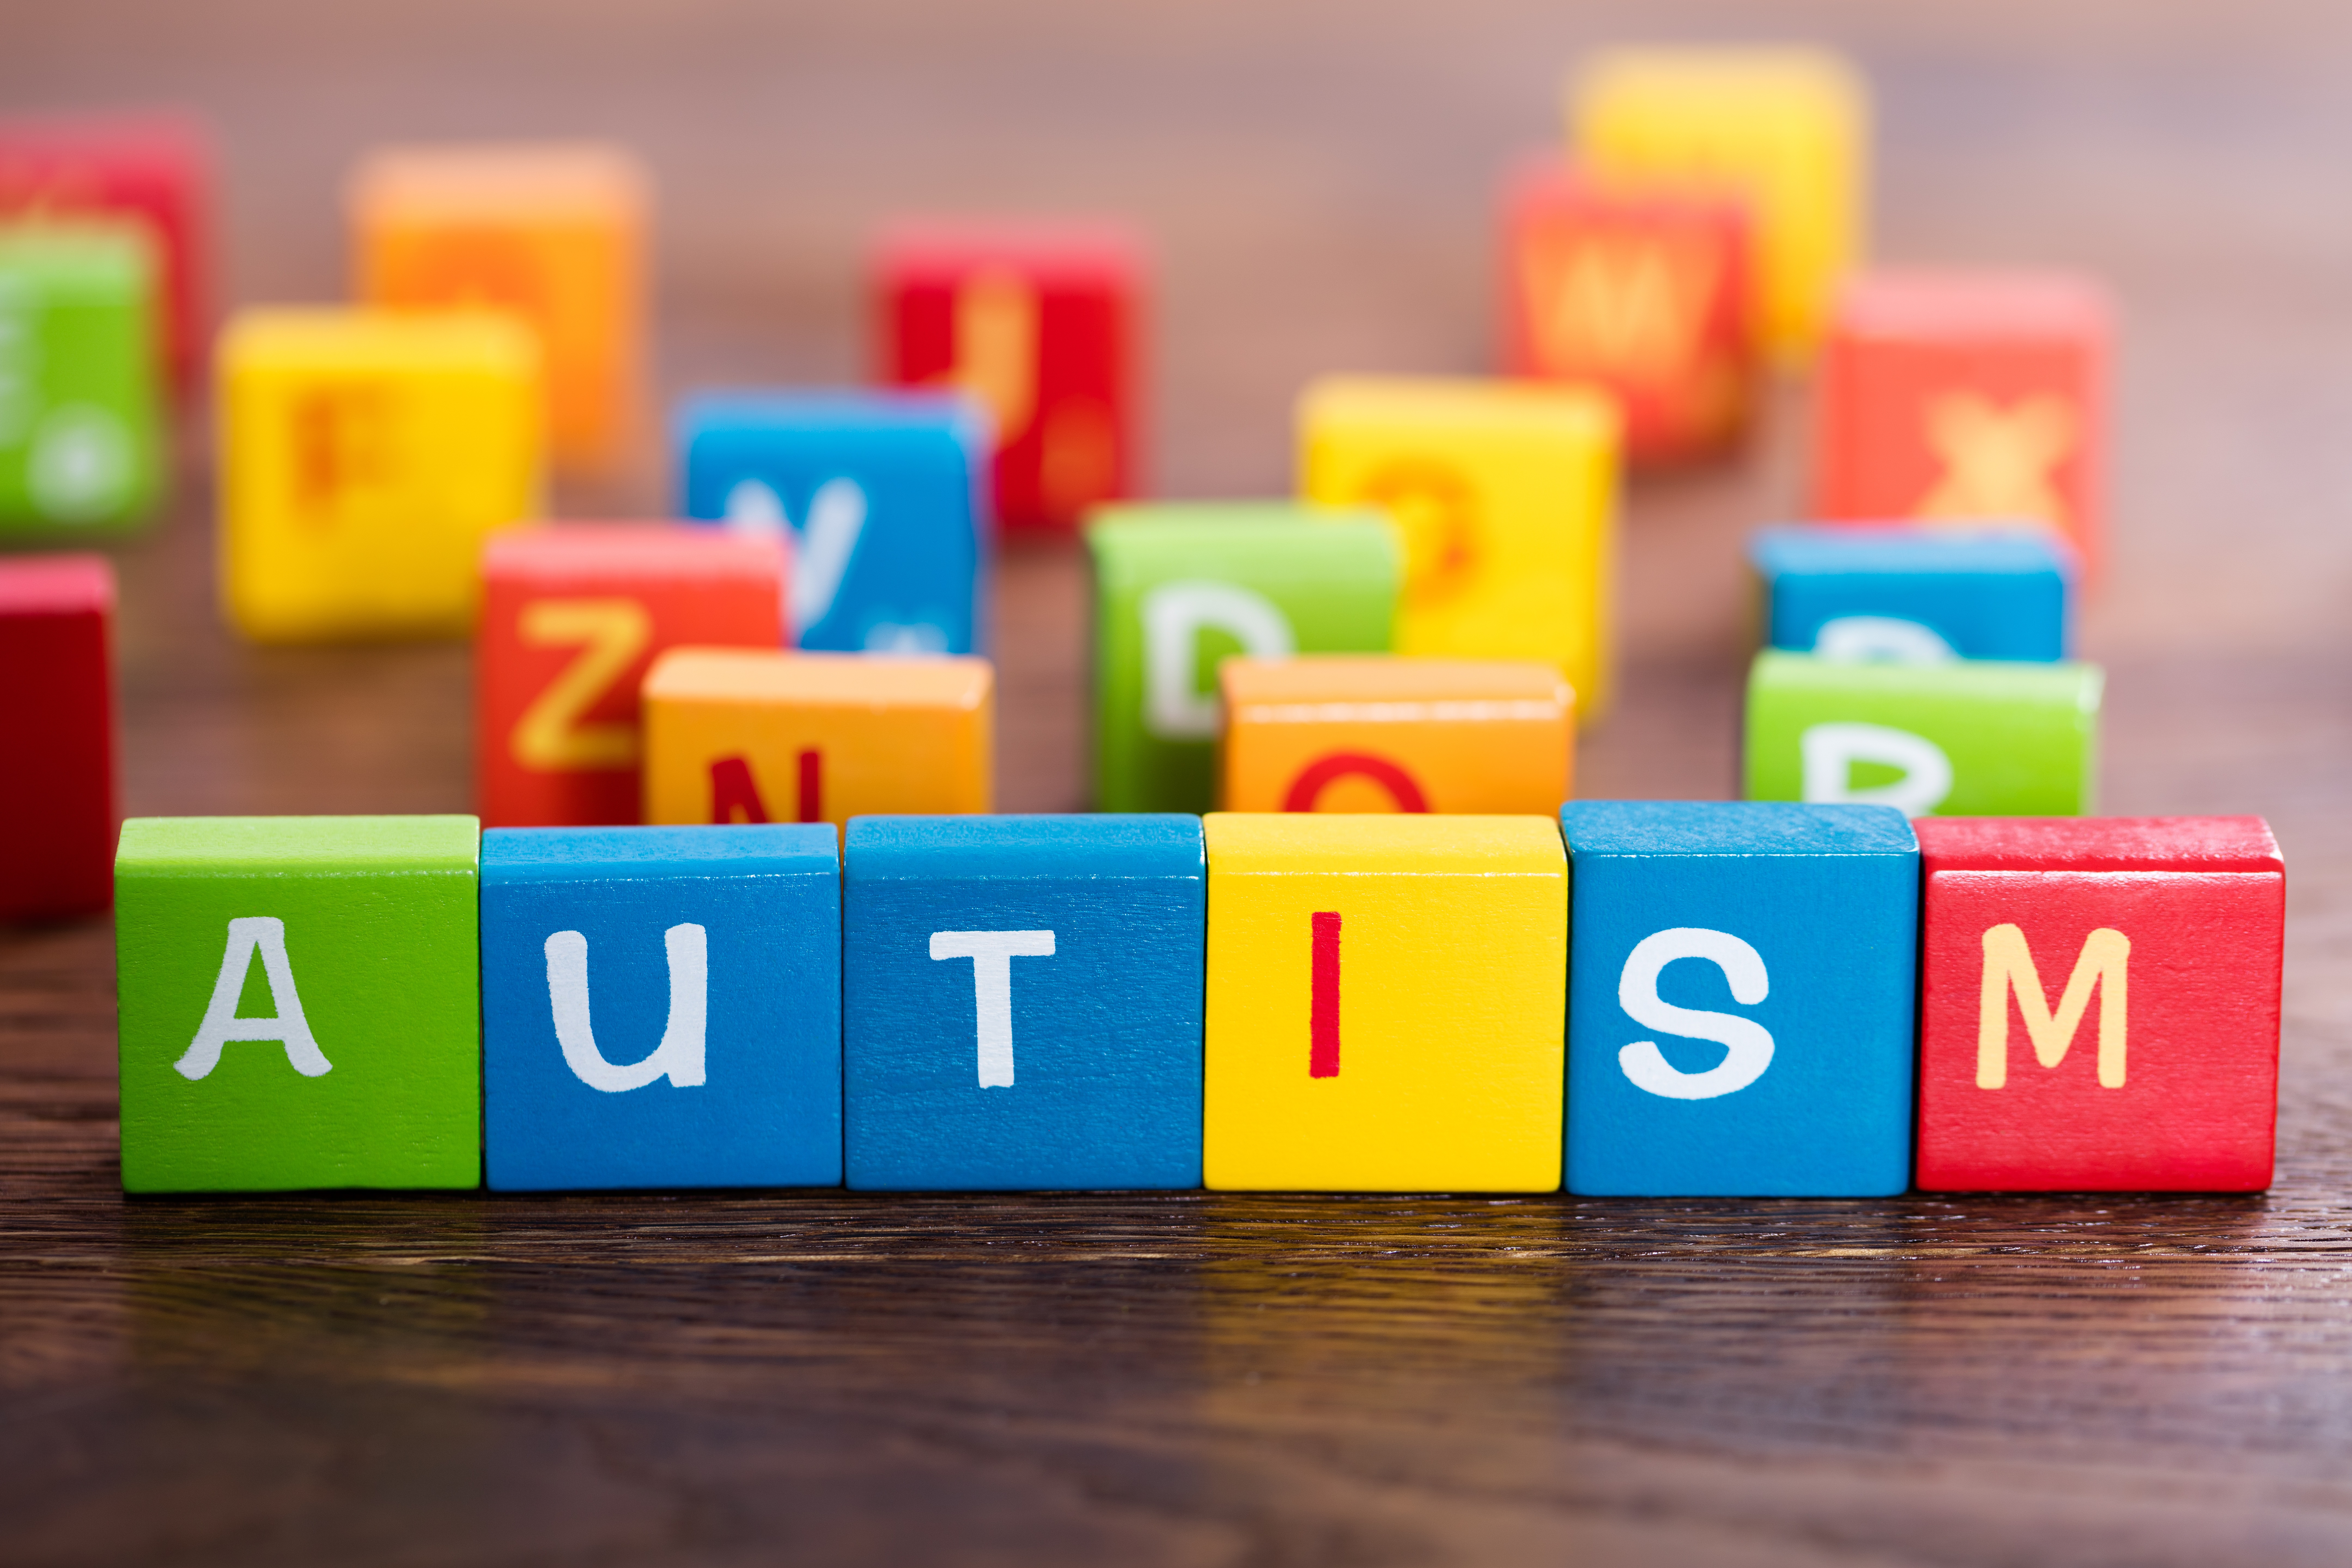 Course Image for XOA8AR71 NCFE CACHE Lv2 Understanding Autism